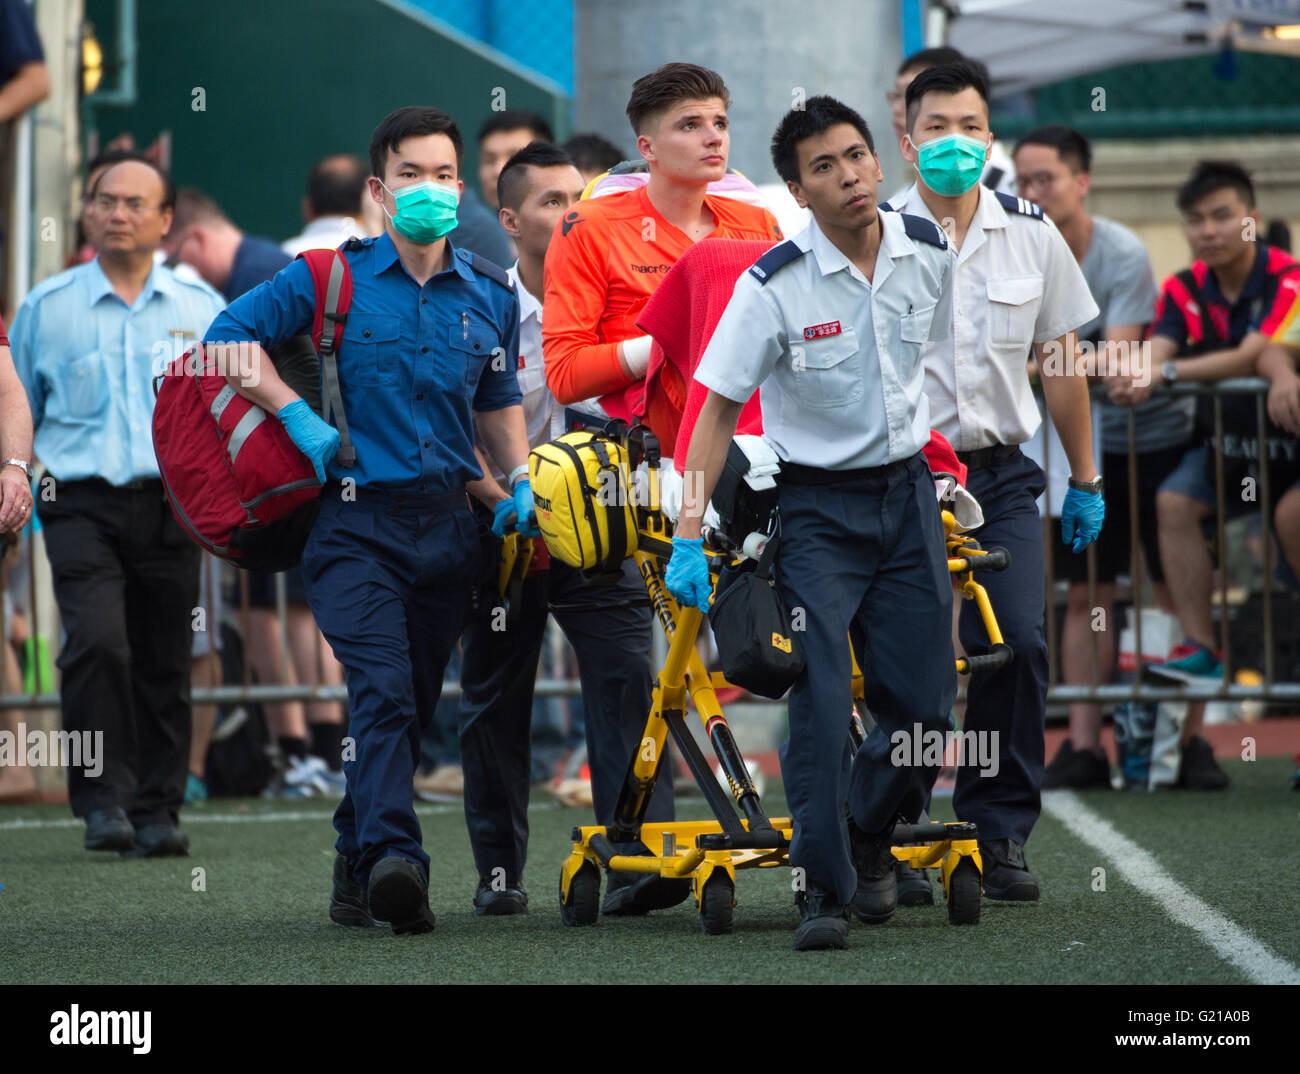 Hong Kong, 22nd May 2016.HKFC Citibank Soccer sevens Cup final Aston Villa vs West Ham United. Aston Villa take the cup. Goalkeeper MATIJA SARKIC is stretchered away after an injury sustained during a great save. Stock Photo